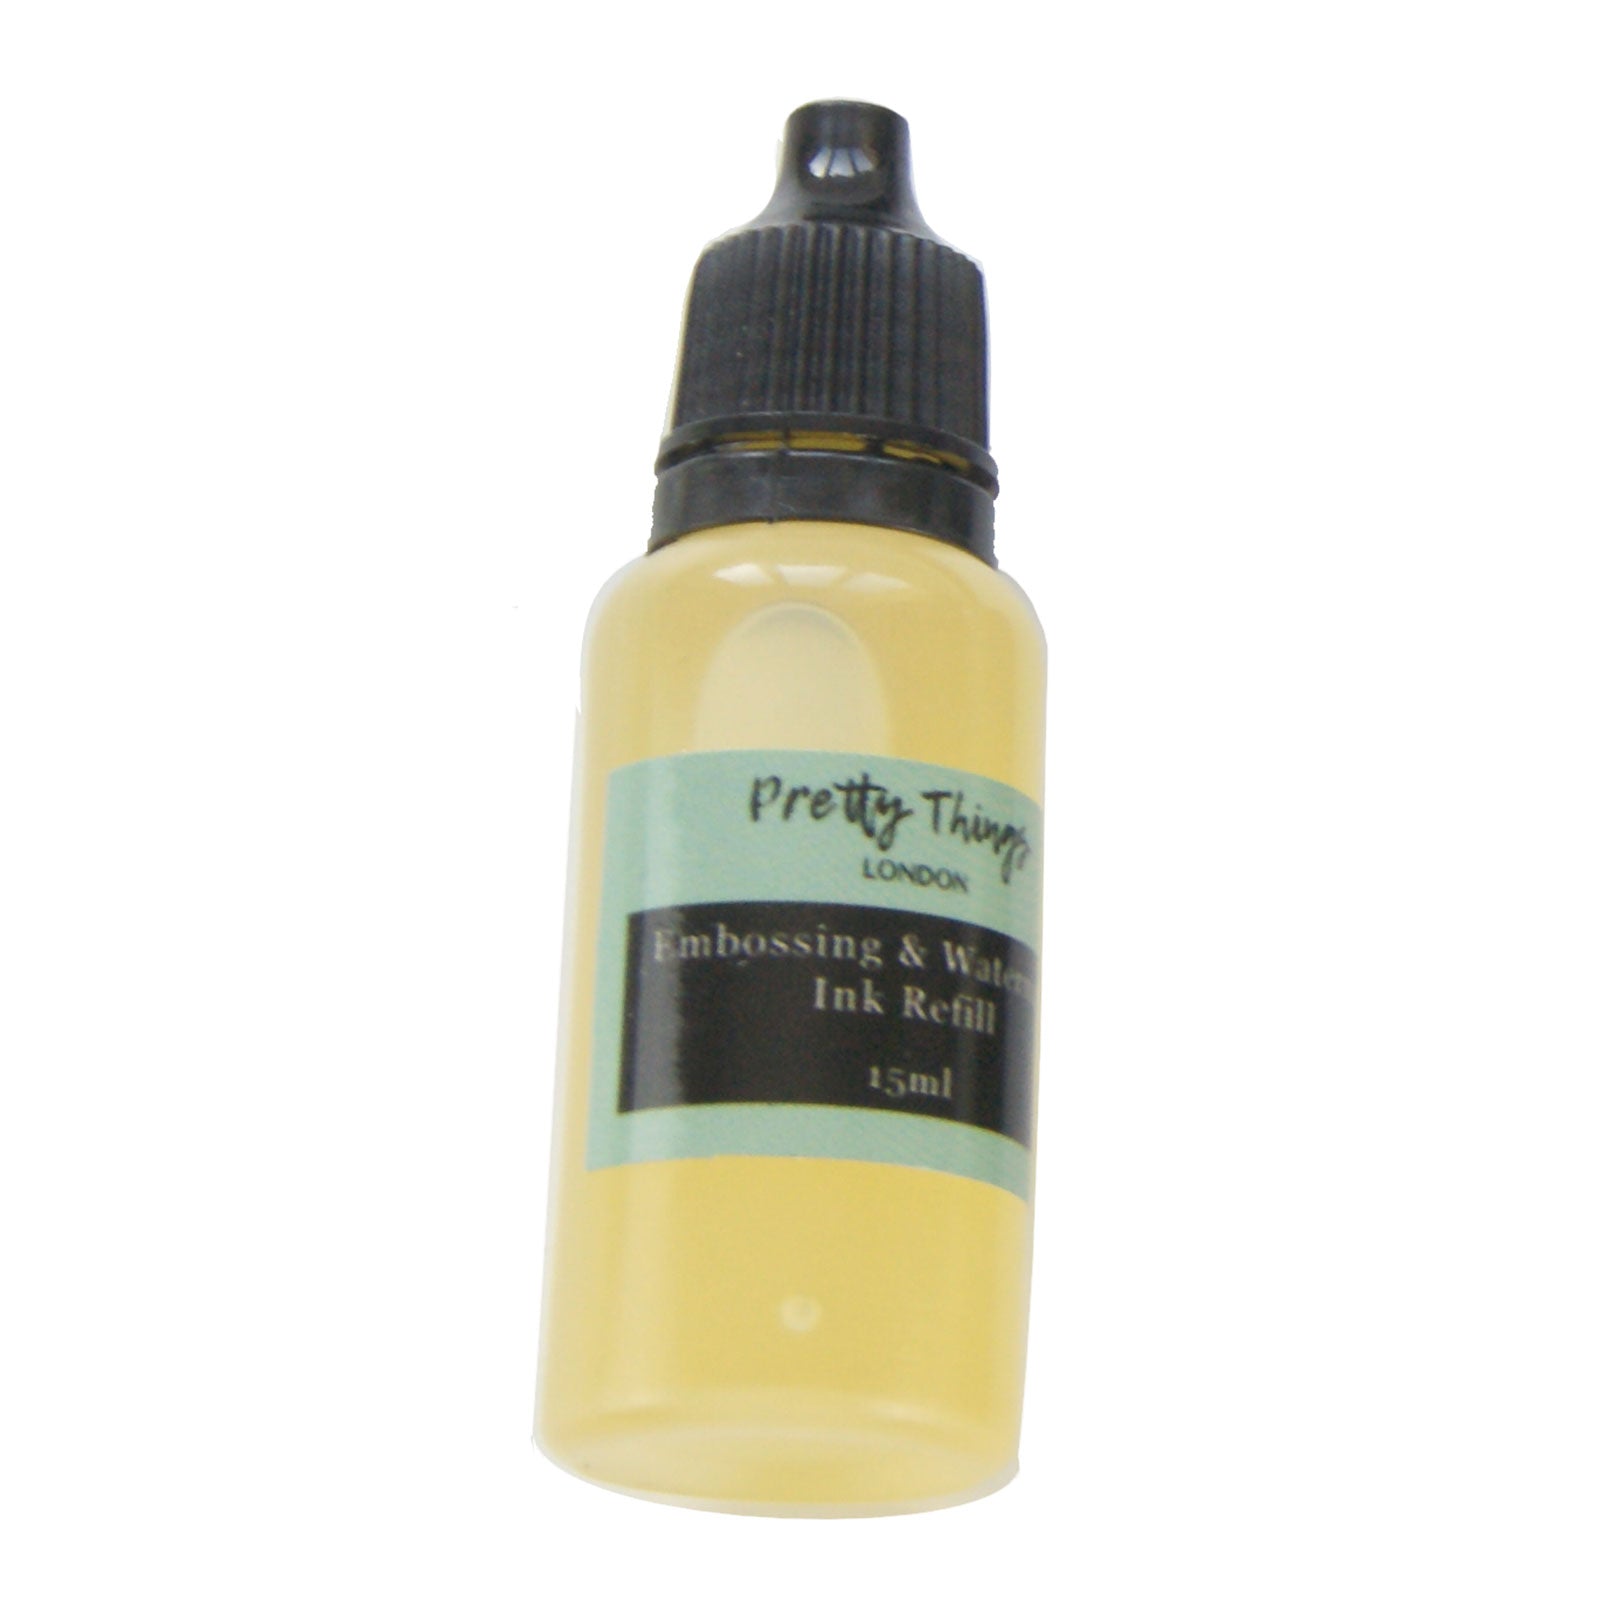 Embossing Clear Ink Refill 15ml